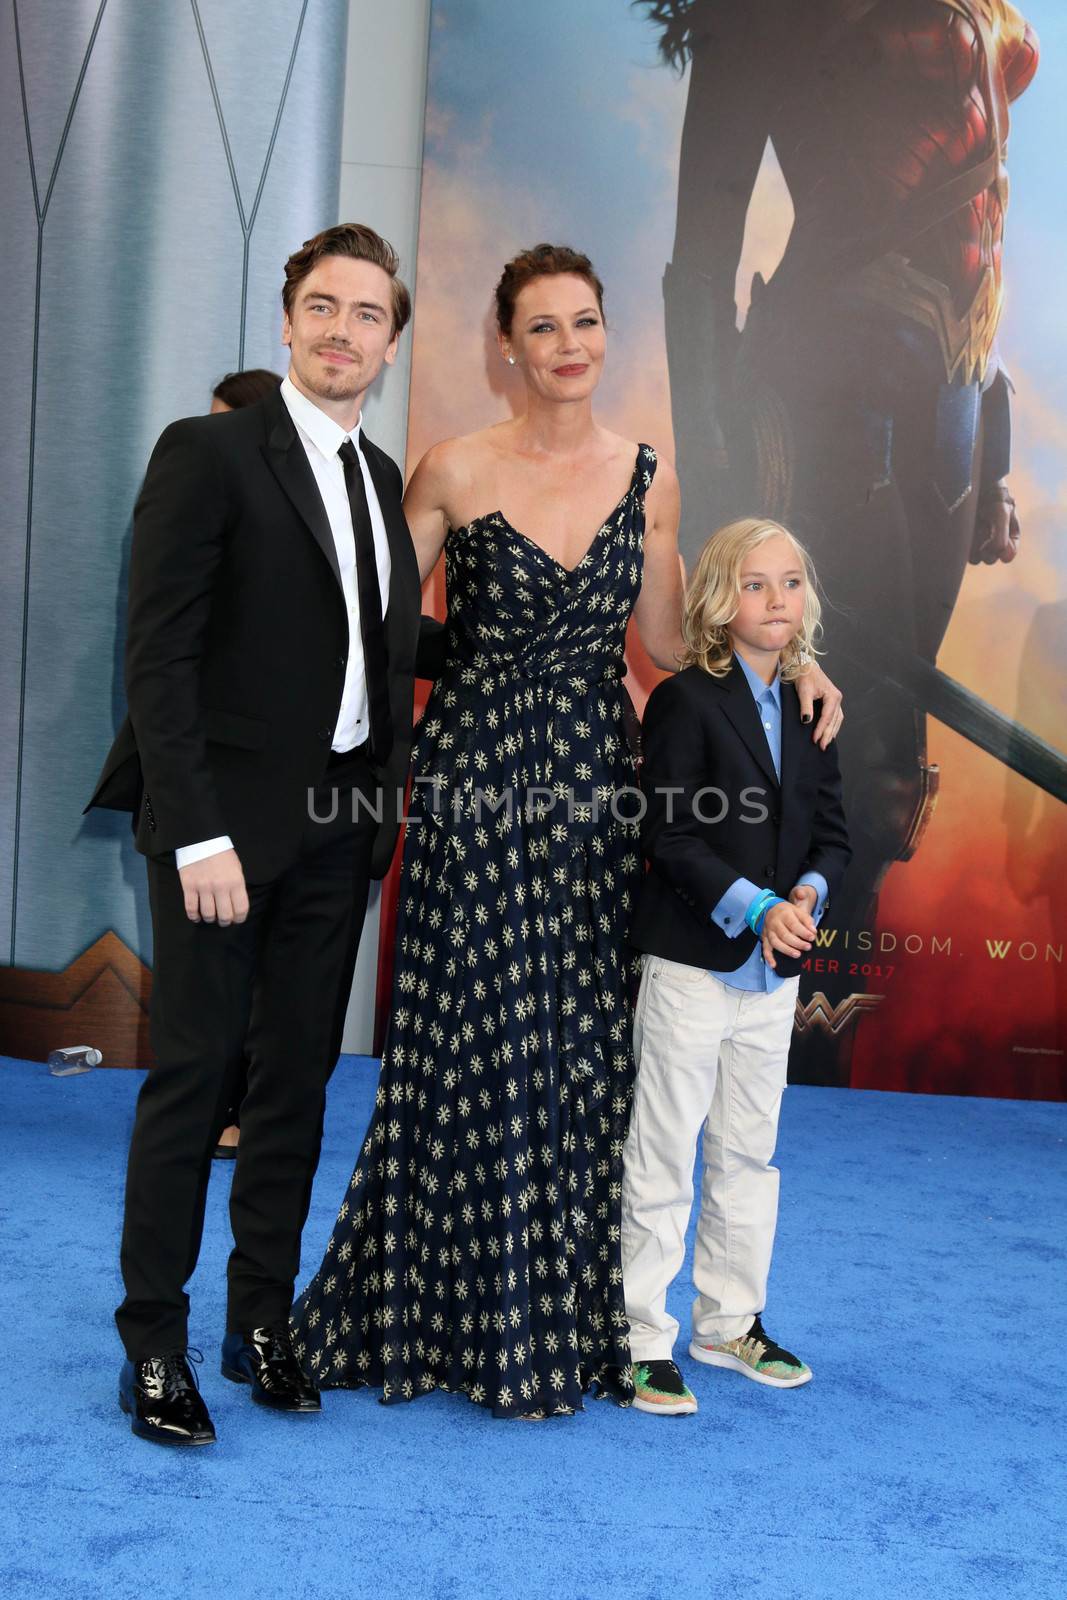 Sebastian Sartor, Connie Nielsen, Bryce Thadeus Ulrich-Nielsen
at the "Wonder Woman" Premiere, Pantages, Hollywood, CA 05-25-17/ImageCollect by ImageCollect